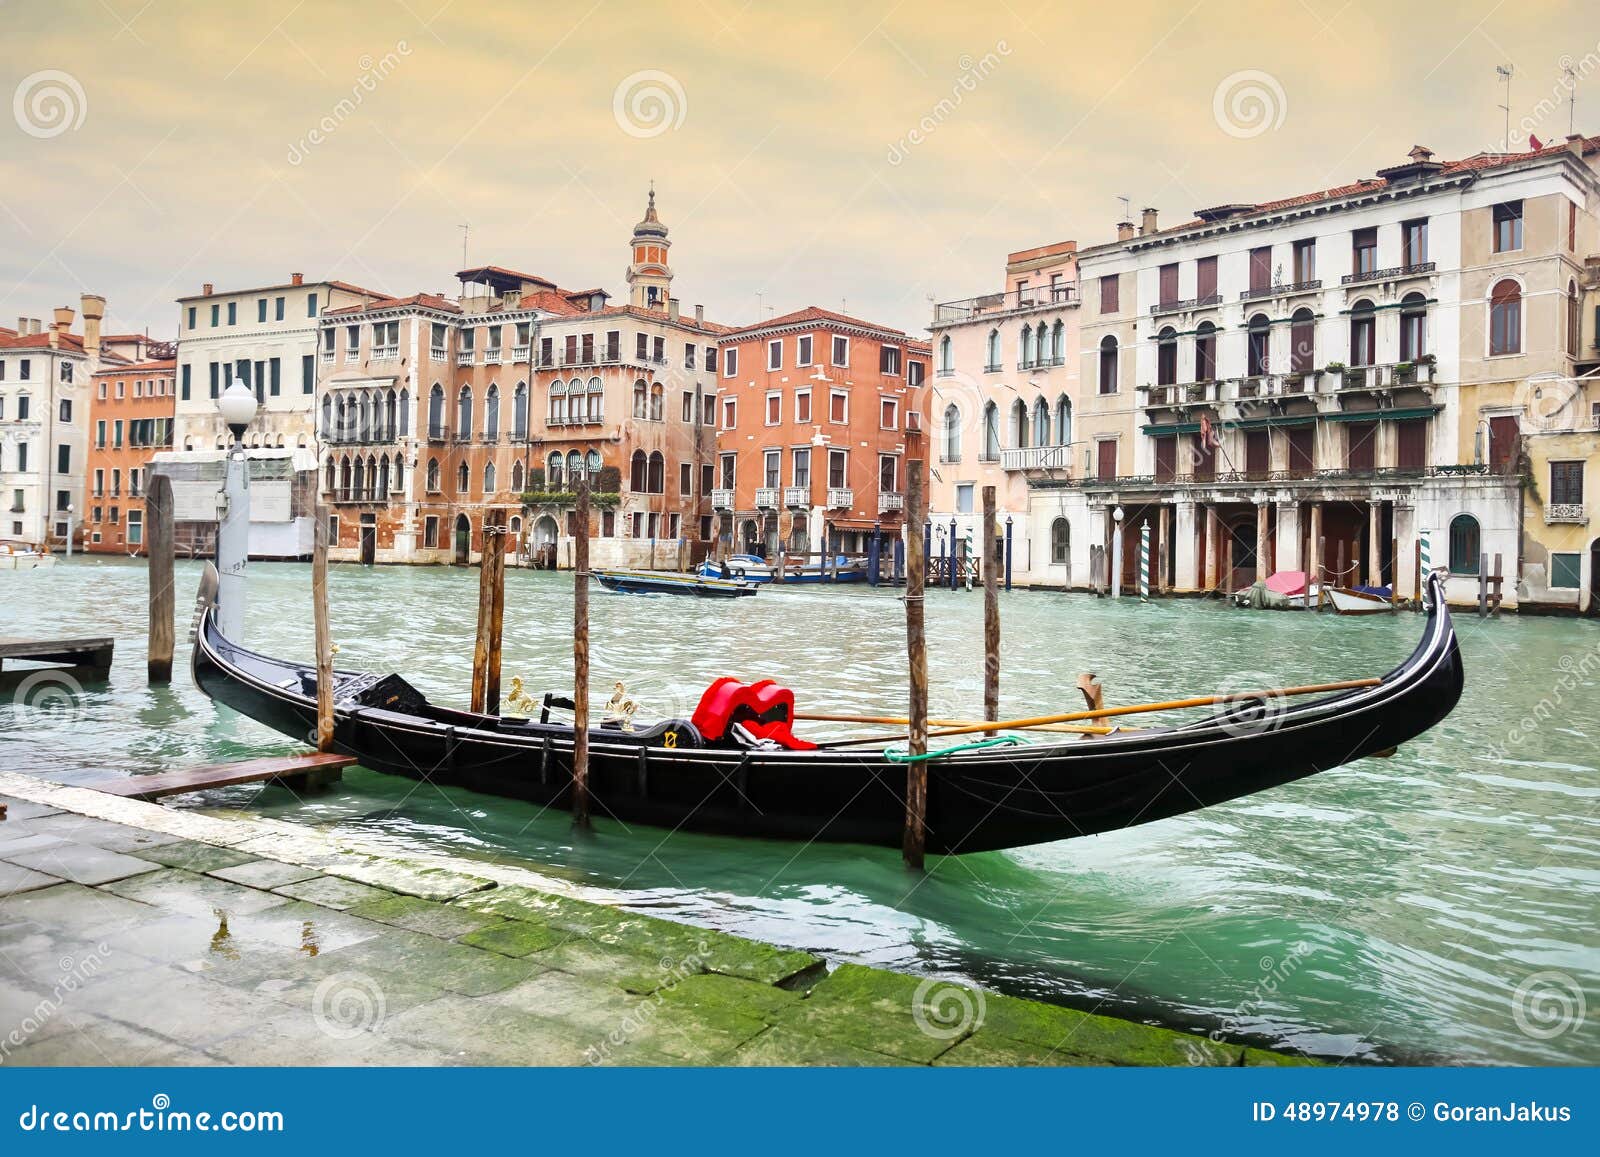 Empty gondola parked in Venice. A view of an empty gondola parked in a Campo Erberia square on grand canal in Venice, Italy.